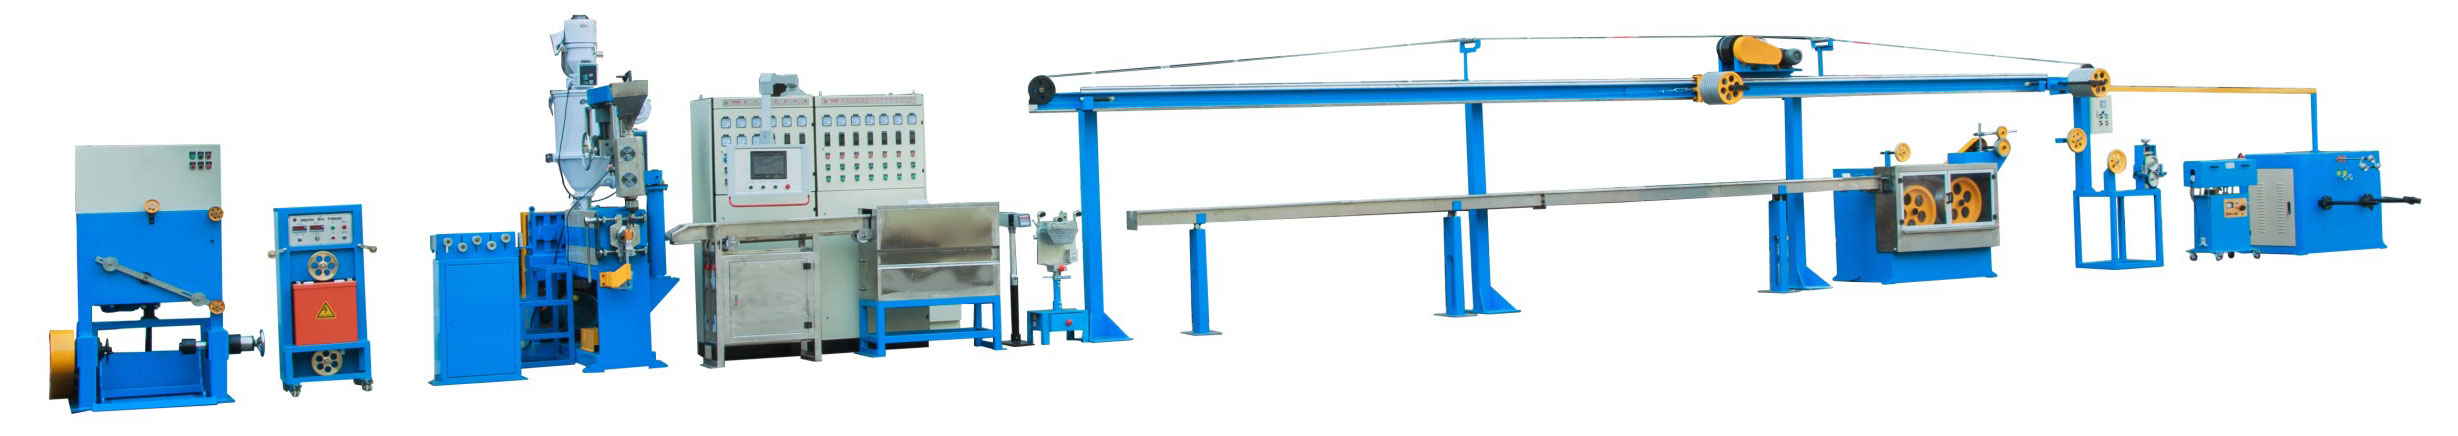 Twin-Layers-Chemical-Foaming-Extrusion-Line-p1.jpg